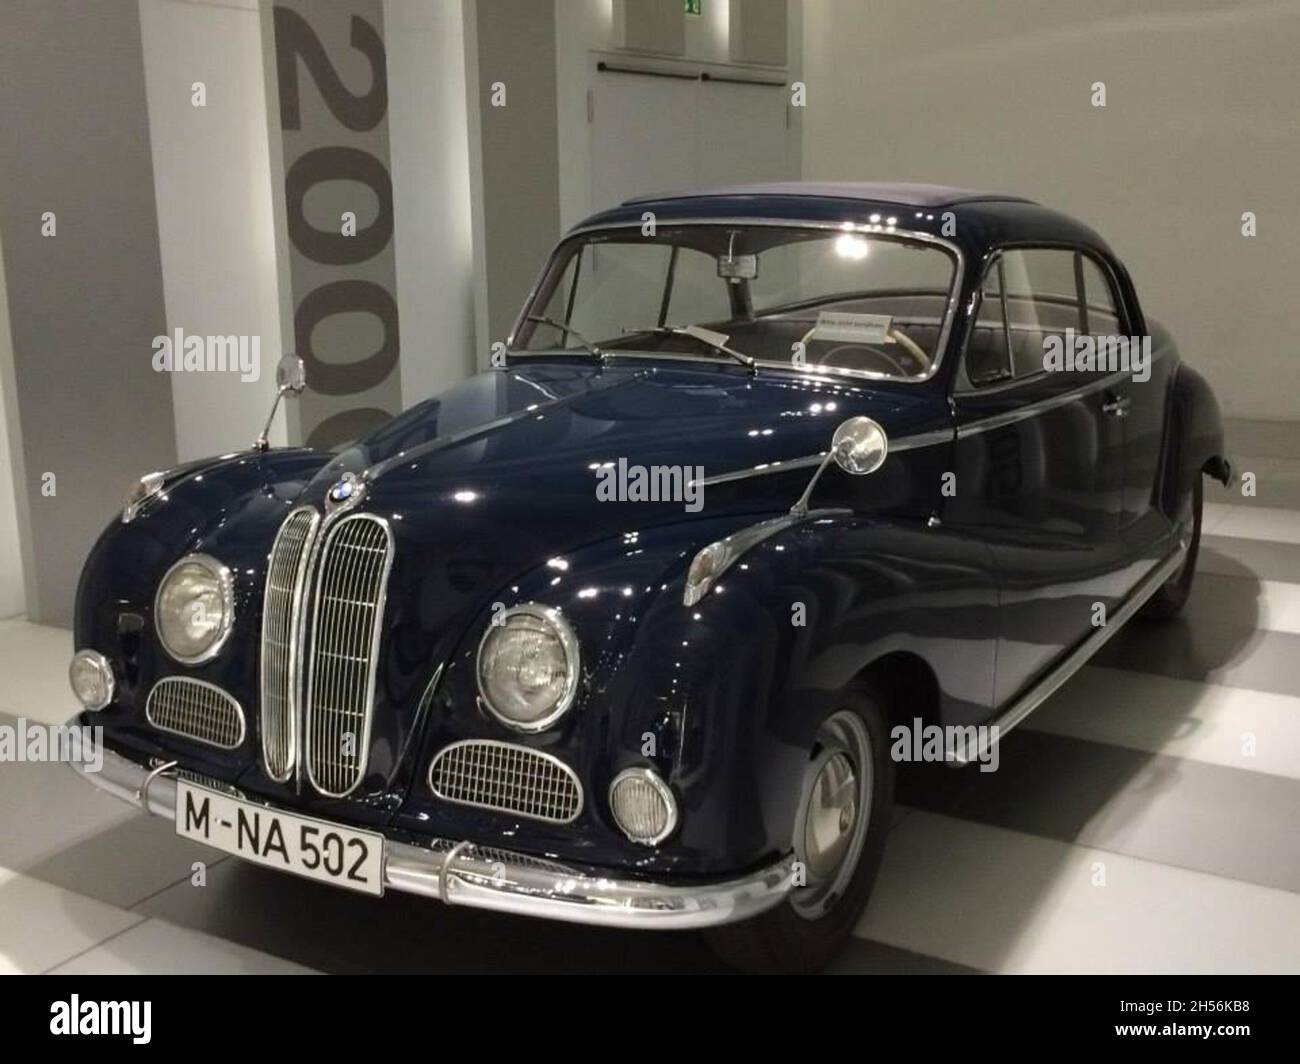 BMW 502: Front view, blue color, year 1954, 2 doors. It was produced between 1954-1958. BMW Museum: Welt - Munich - Germany. Stock Photo